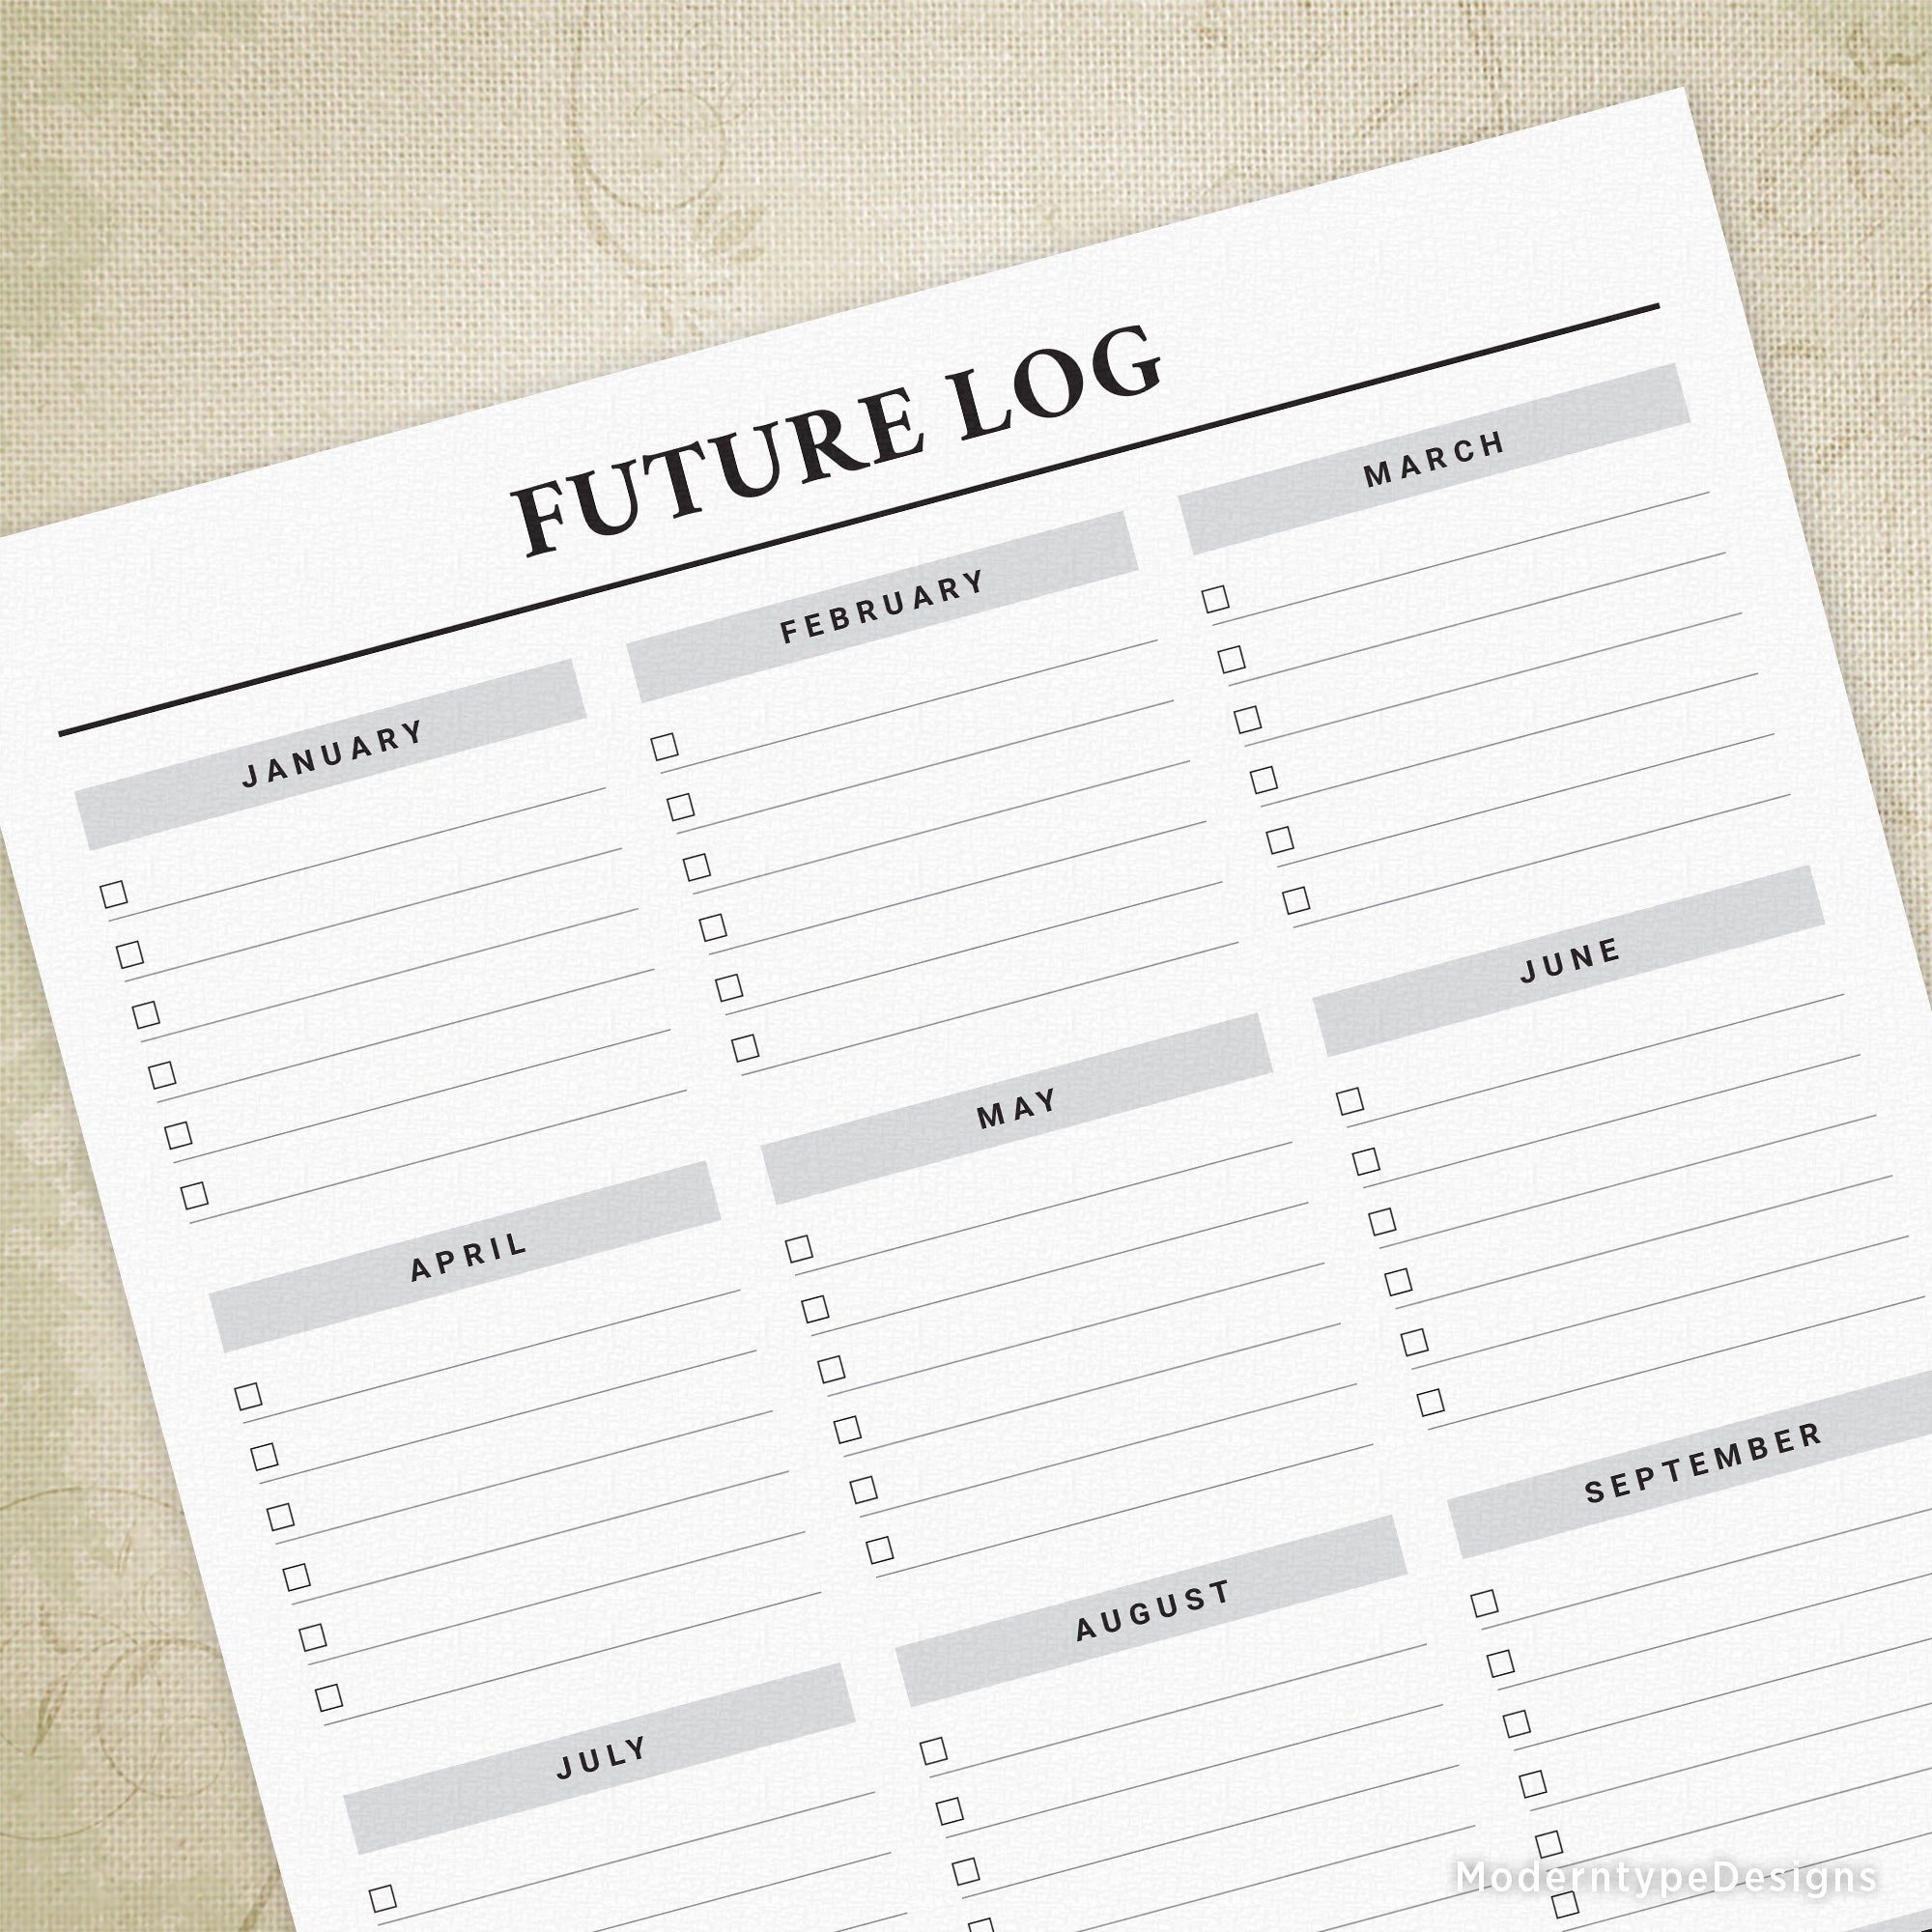 Future Log Printable with Checkboxes